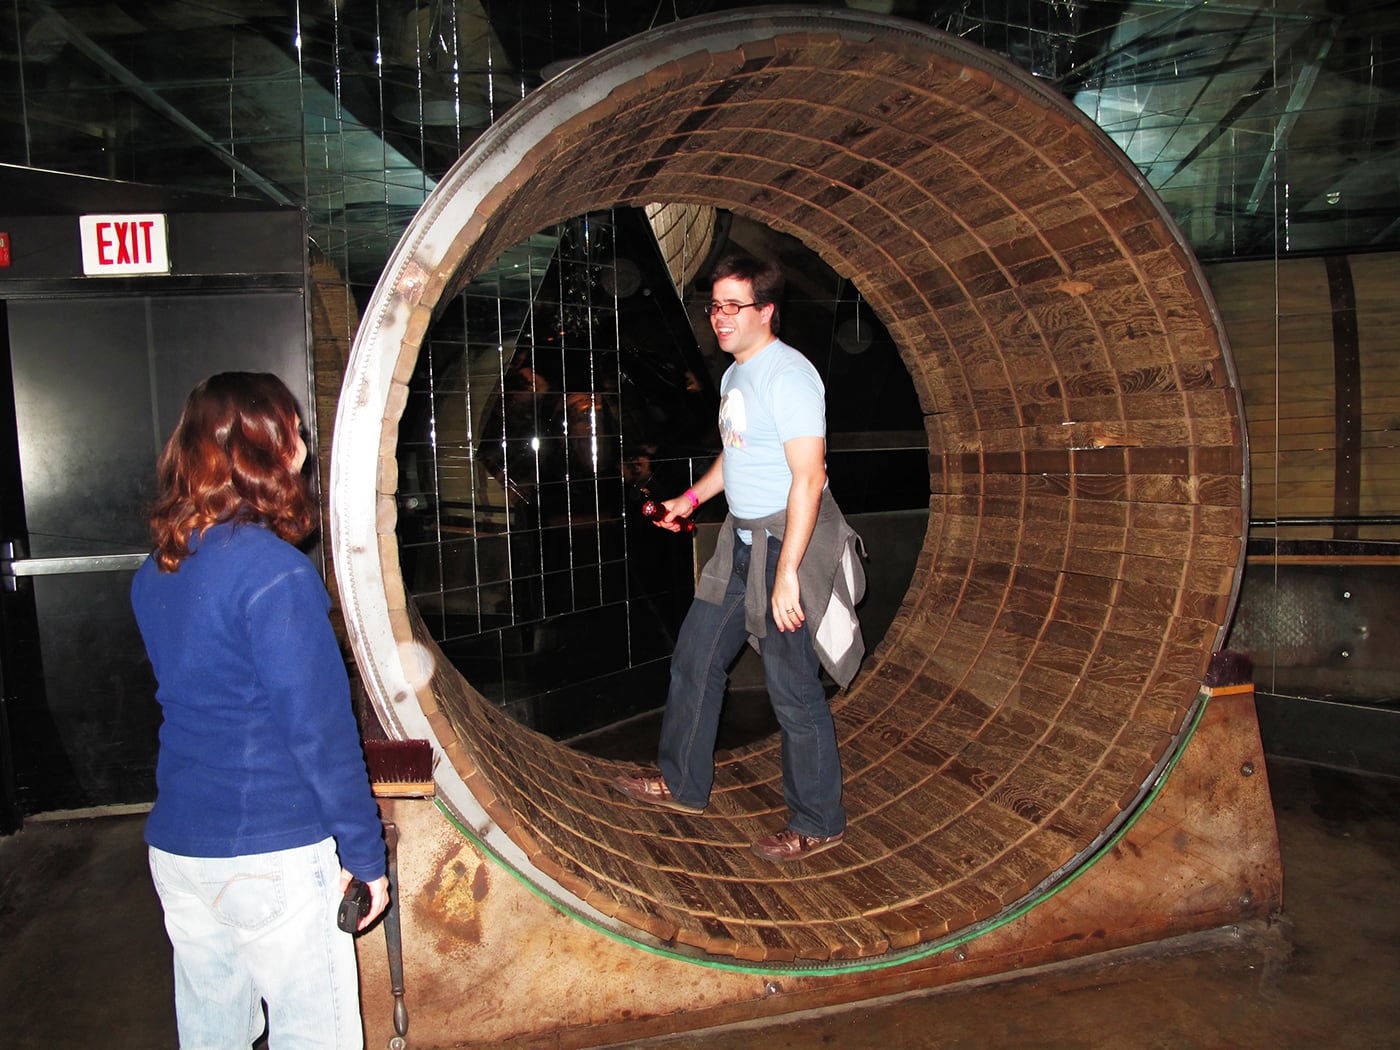 Human Hamster Wheel at The City Museum in St. Louis, Missouri.